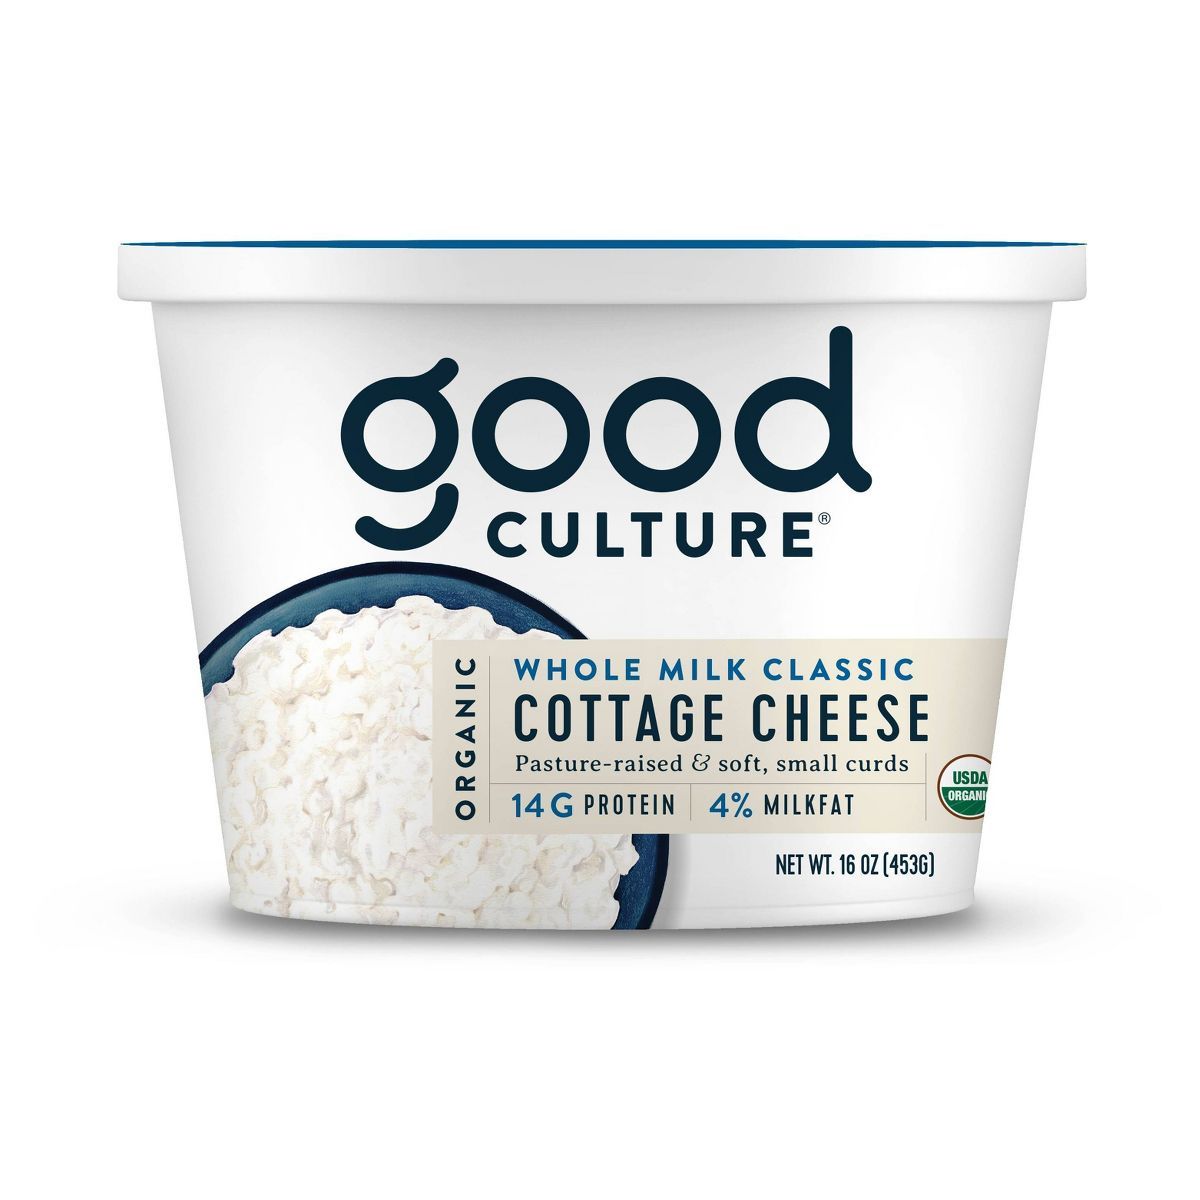 Good Culture Organic Whole Milk Classic Cottage Cheese - 16oz | Target